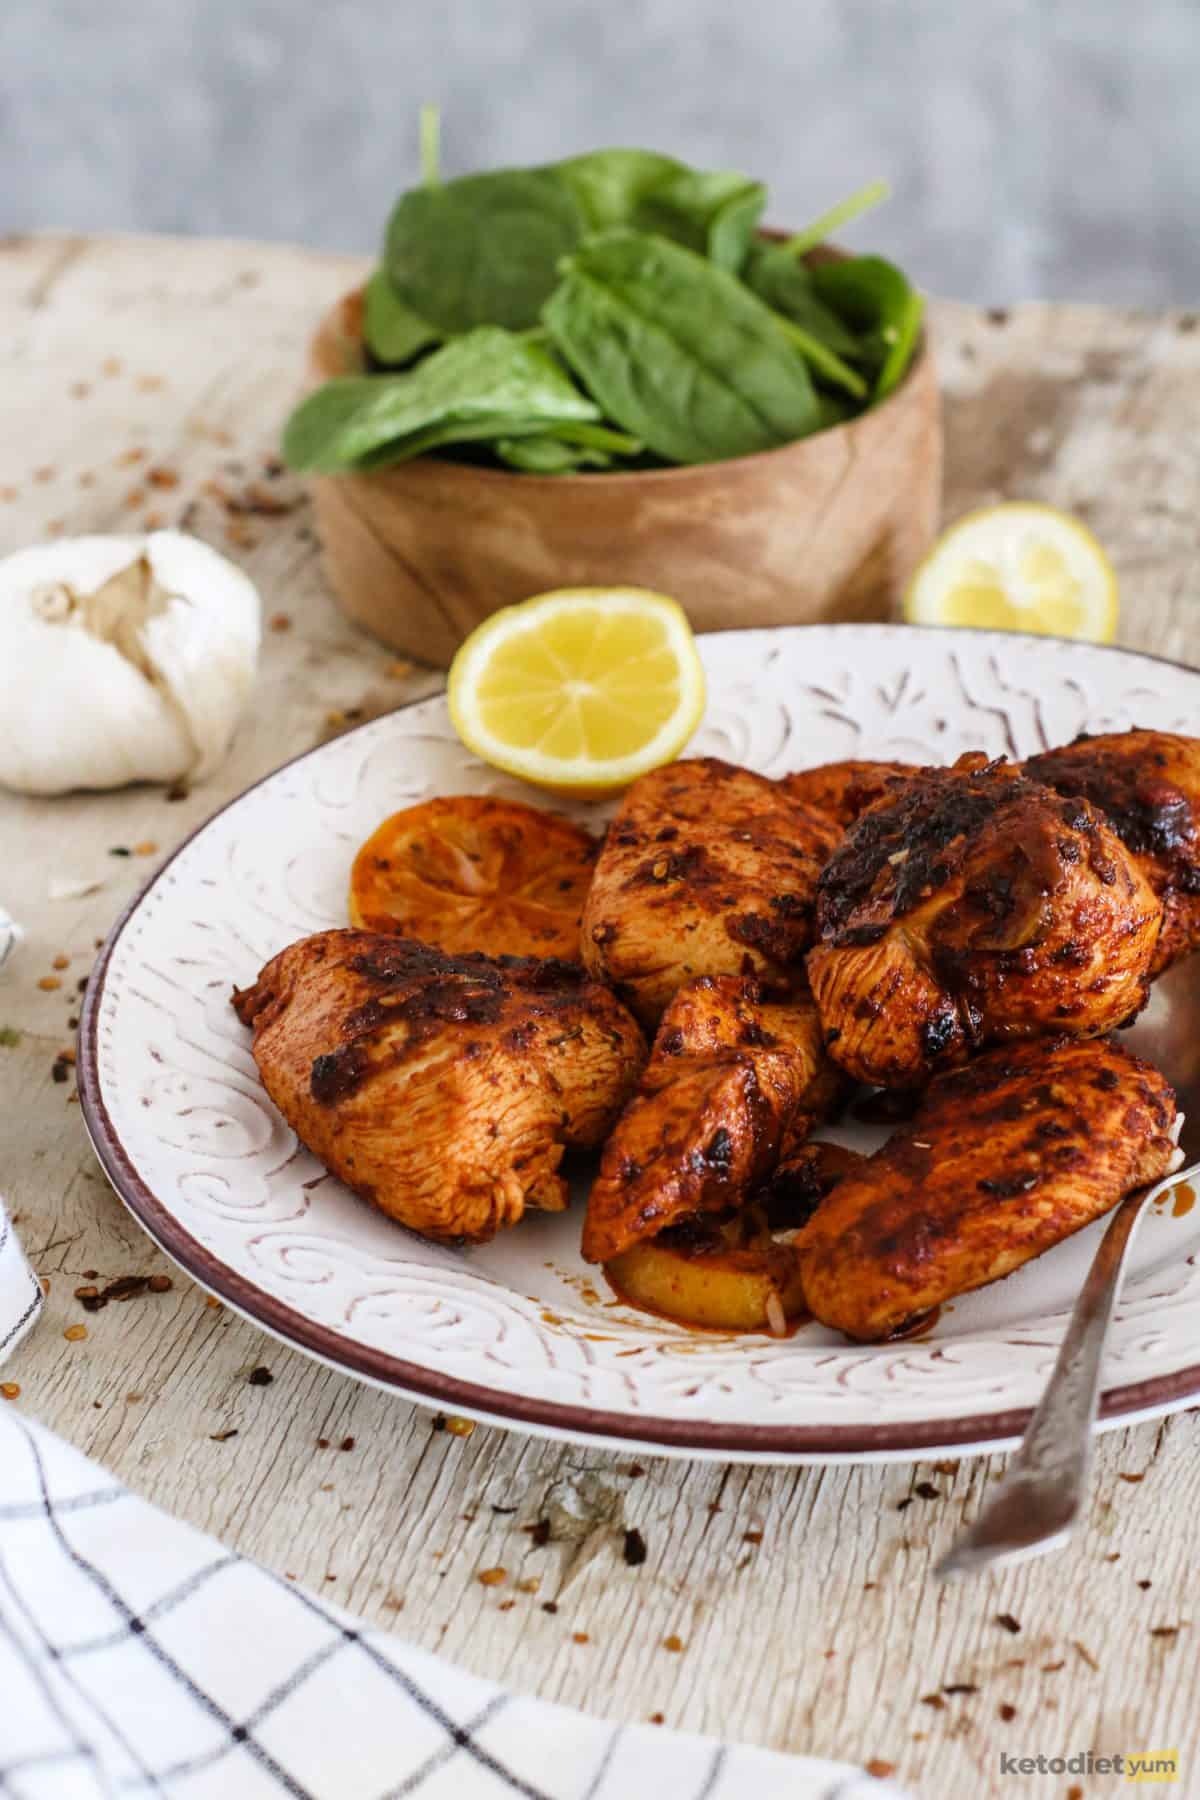 Perfectly charred peri peri chicken breasts that are tender and juicy